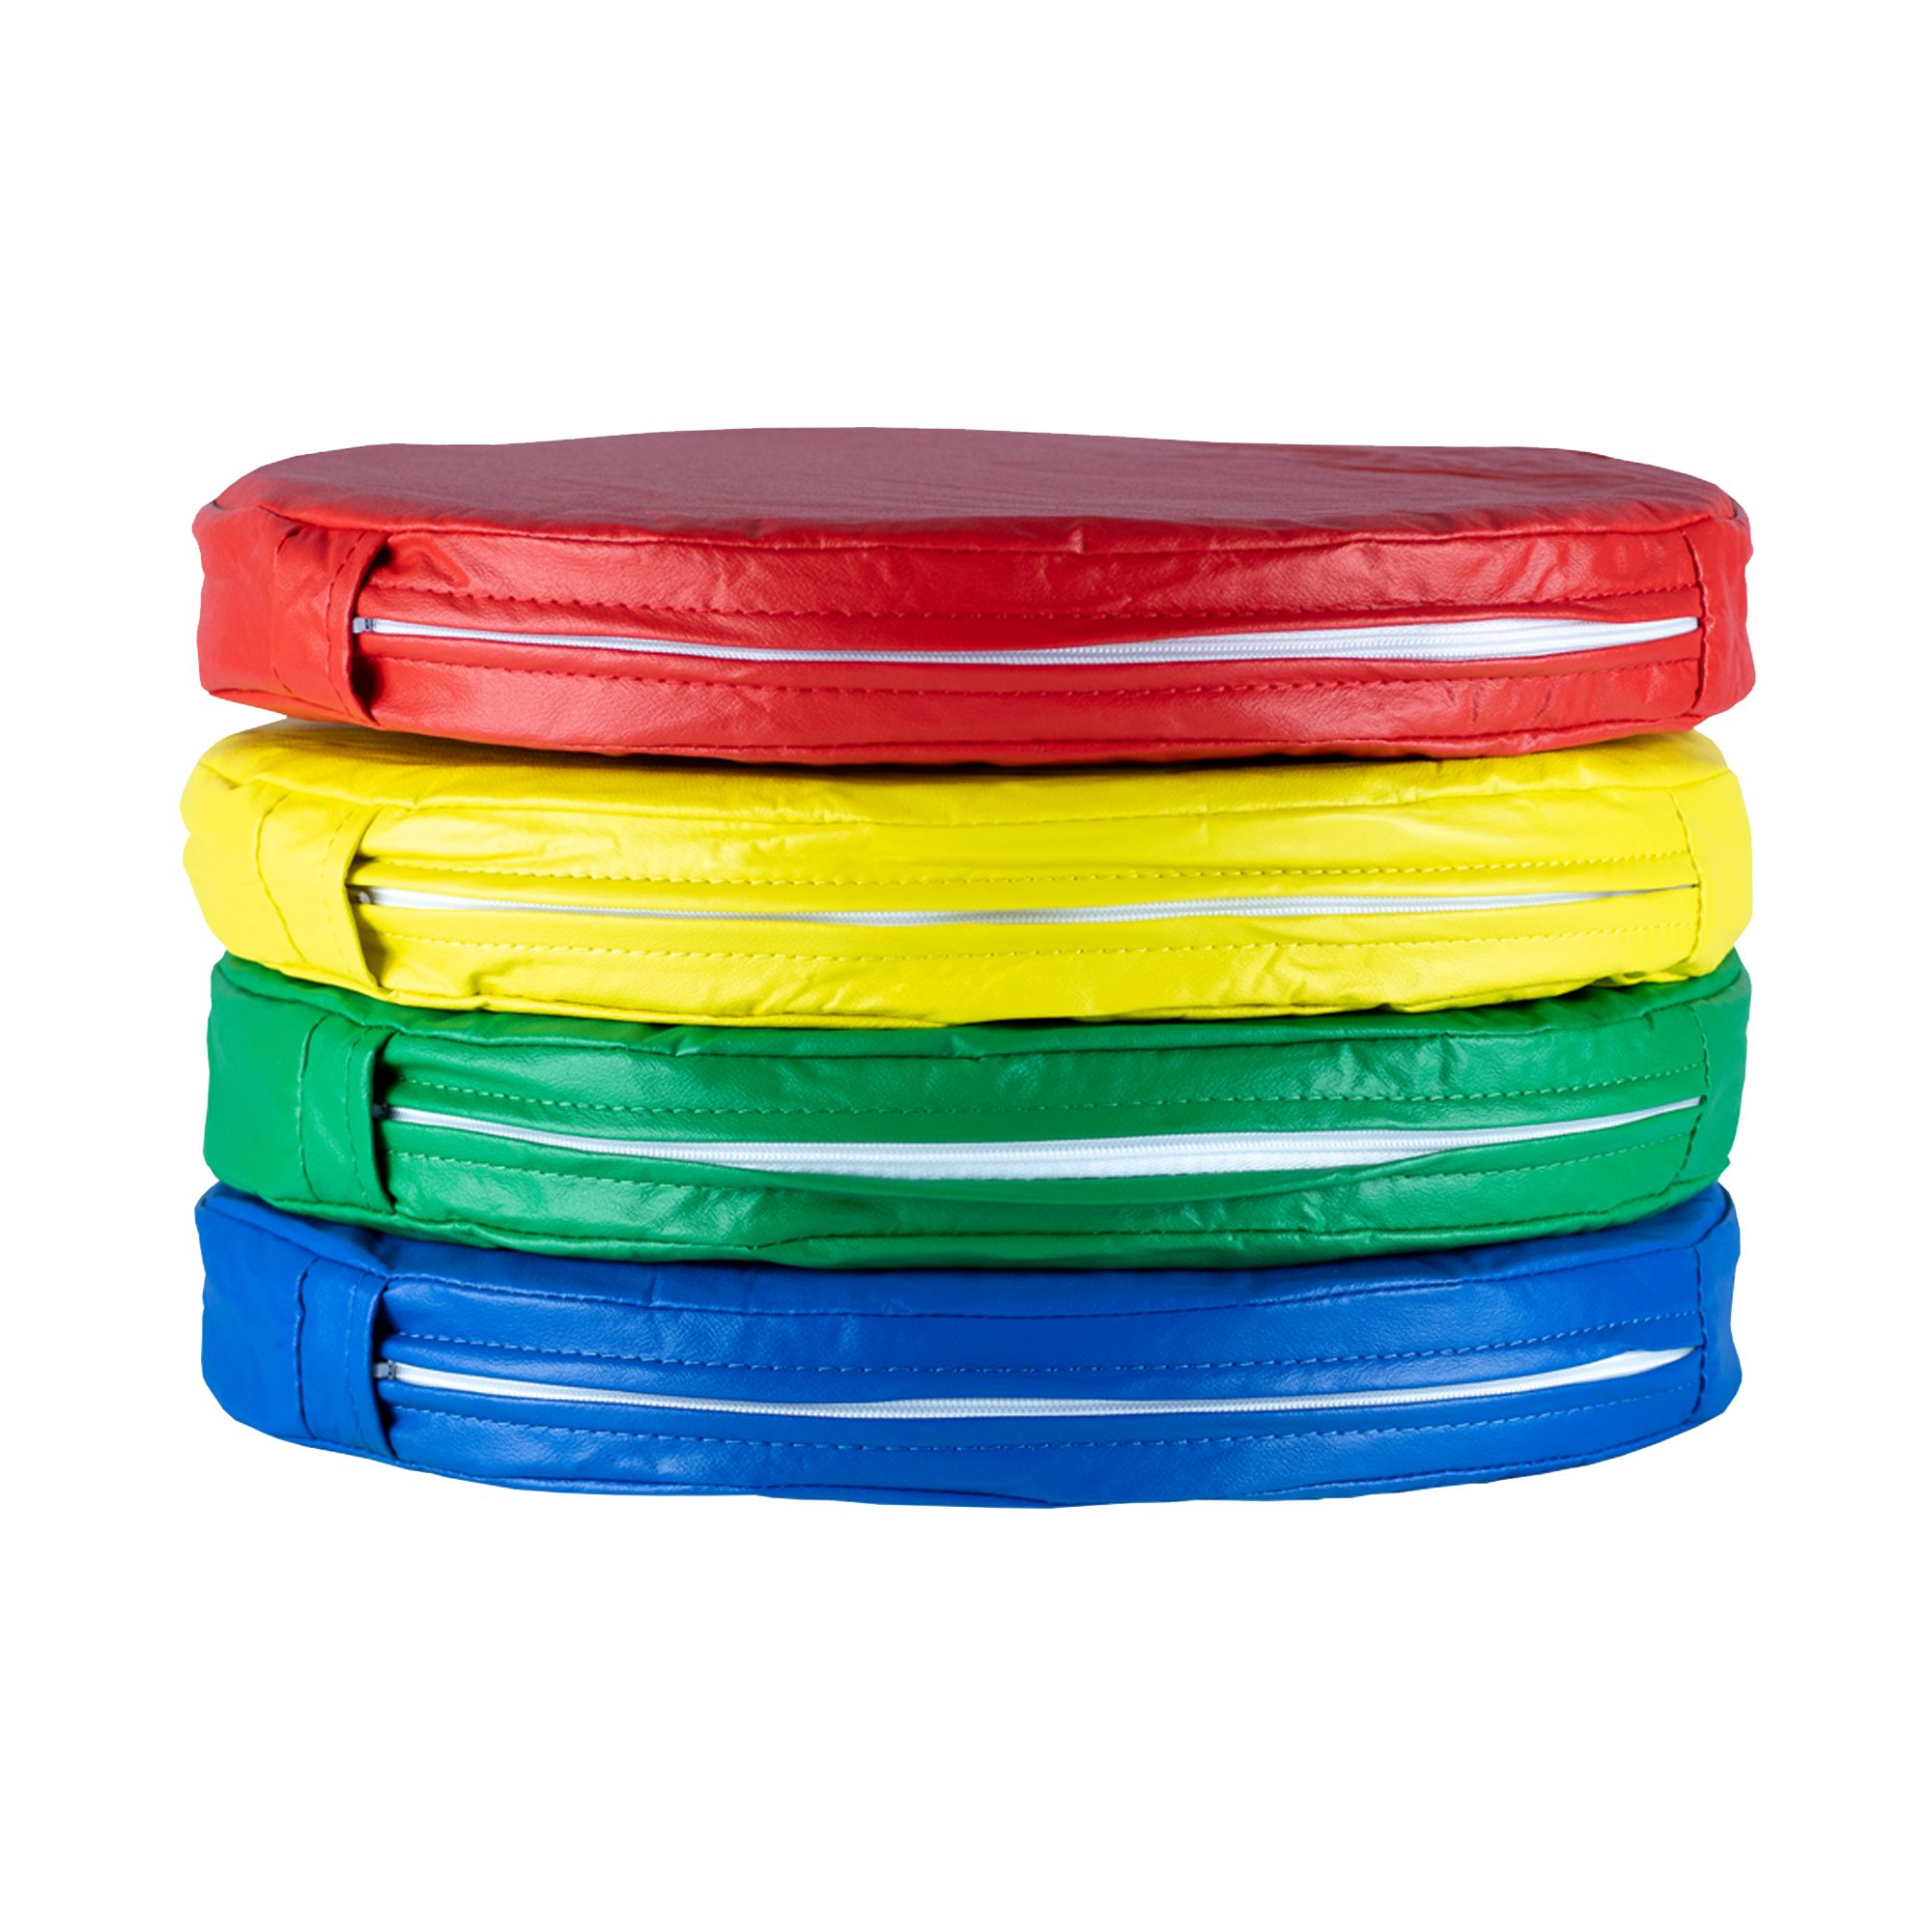 4 PACK OF ROUND KINDERCUSHIONS